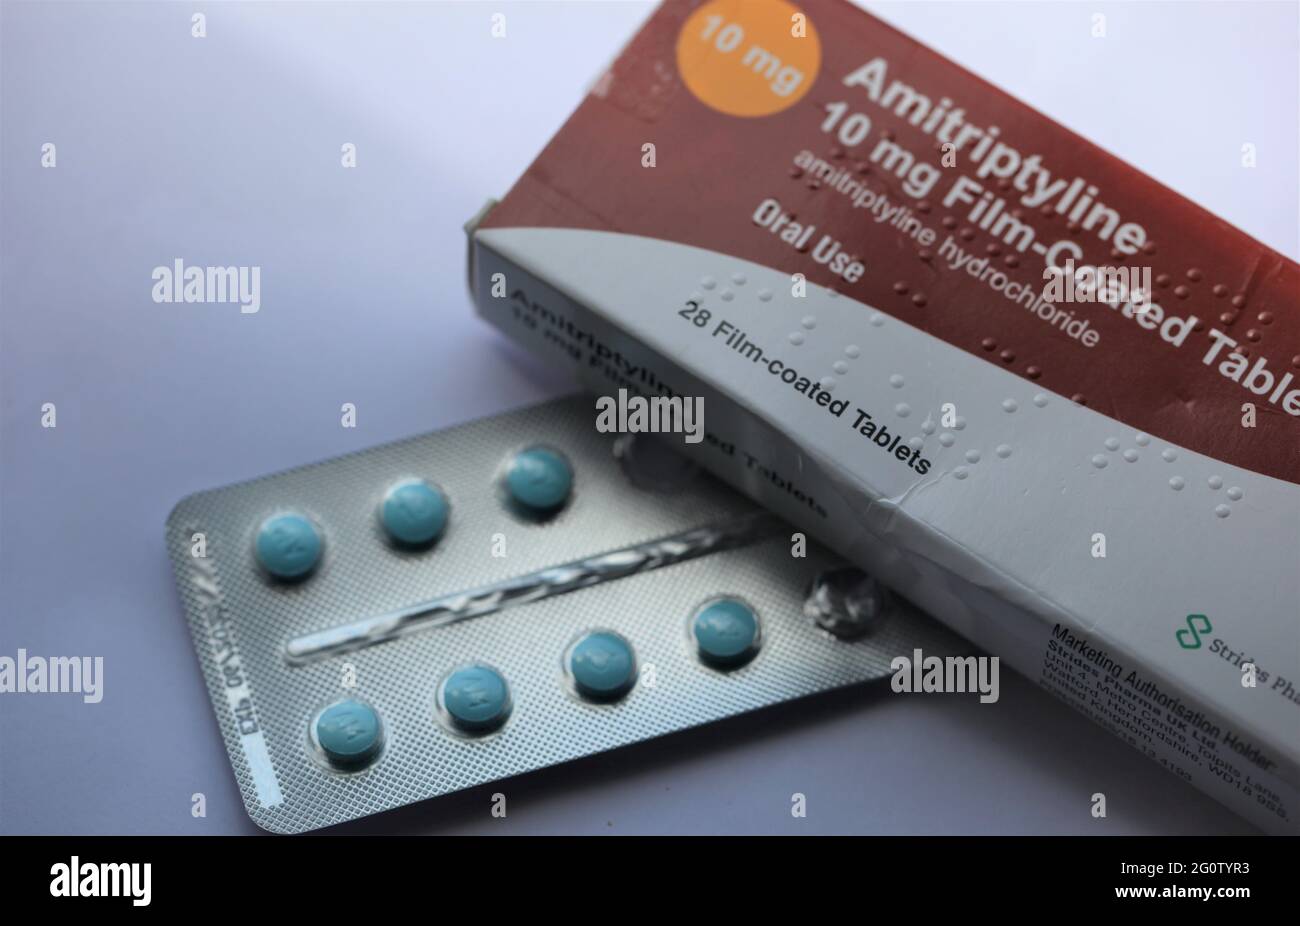 Close-up of a box of Amitriptyline tablets Stock Photo